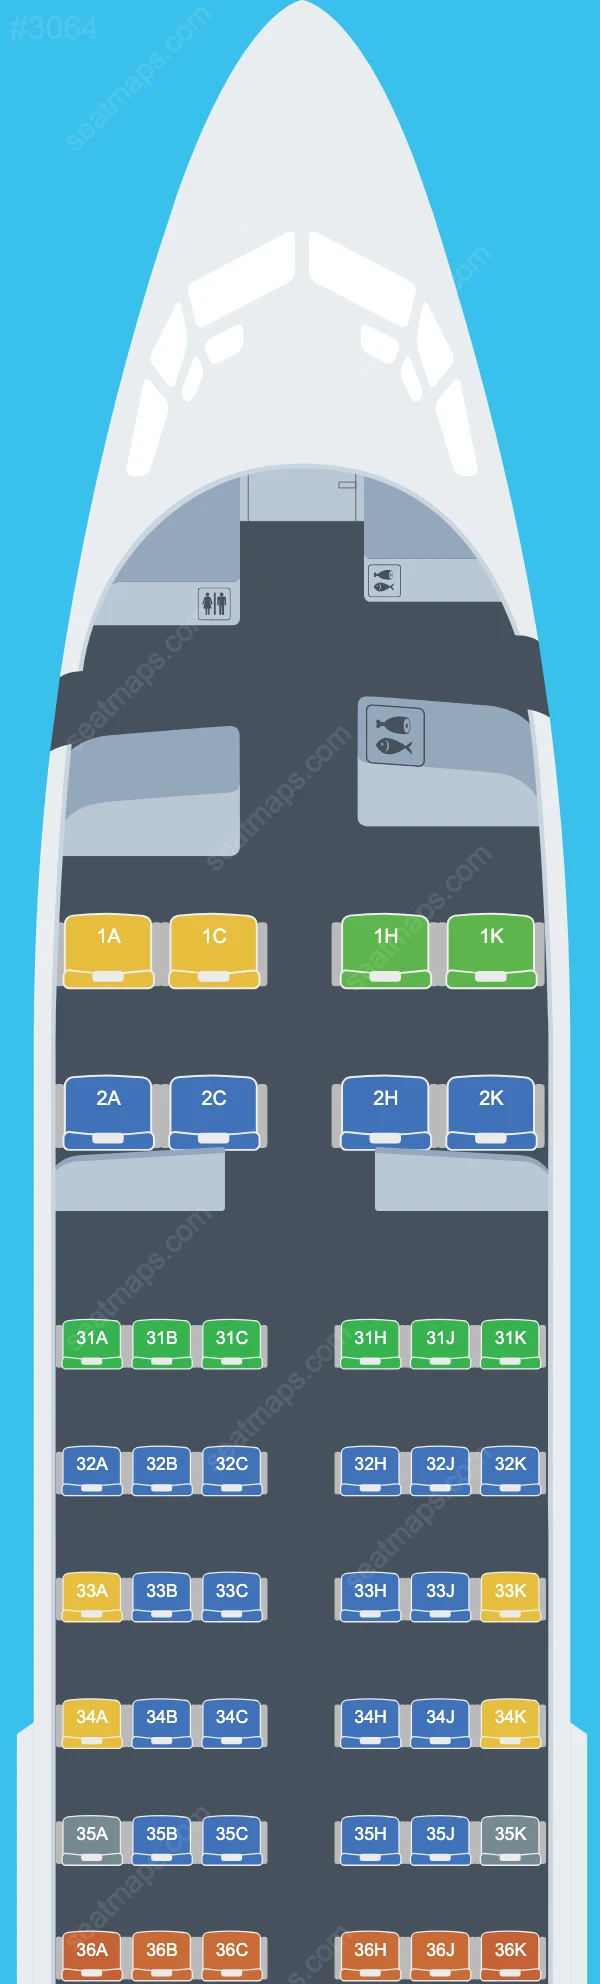 China Southern Boeing 737 Seat Maps 737-700 V.3